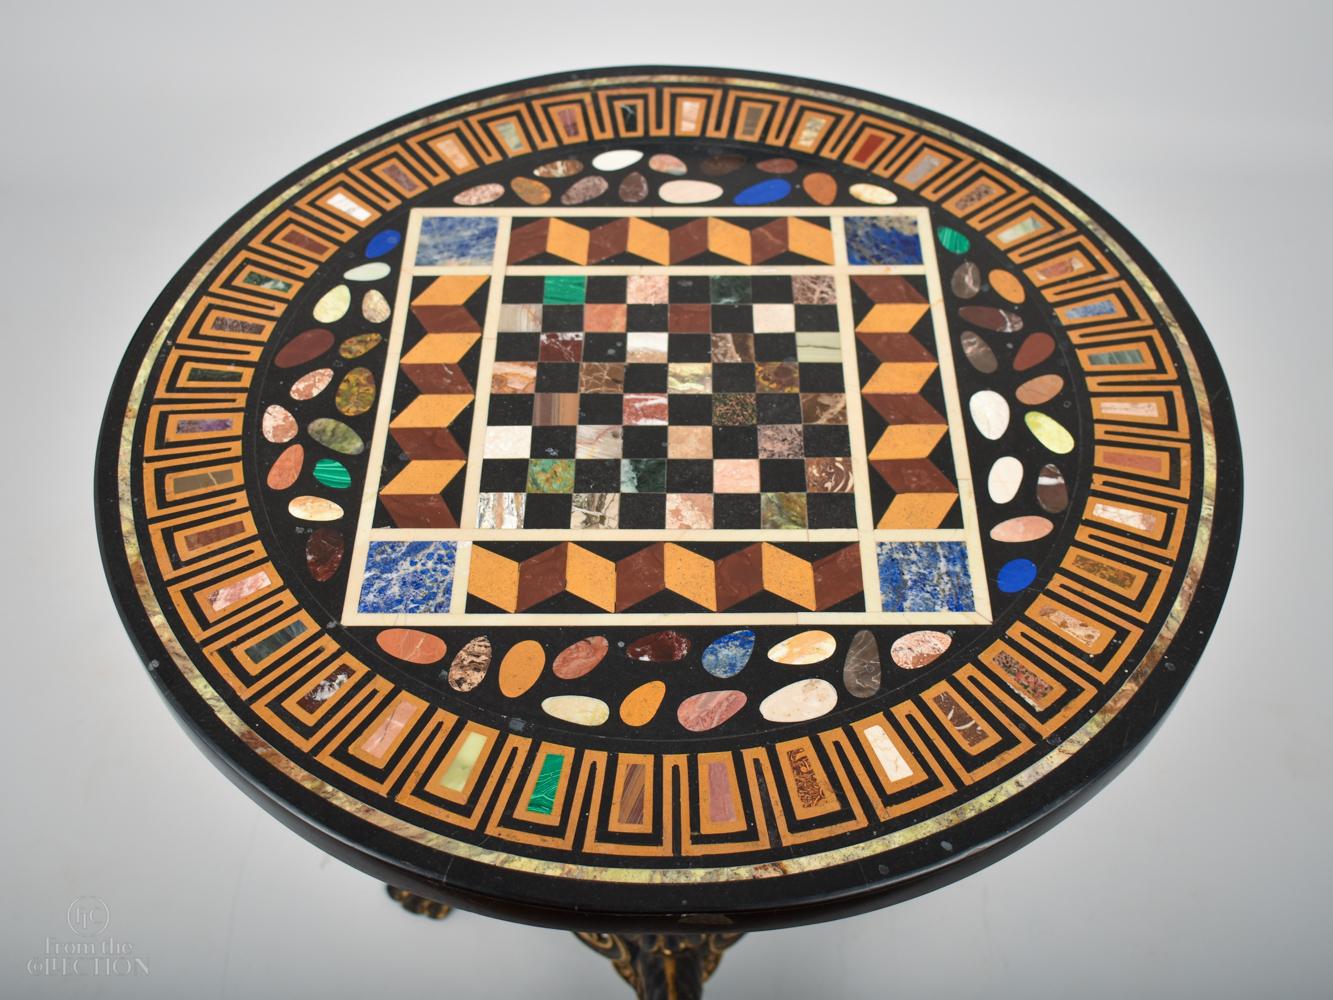 Metal based circular inlaid with semi-precious agates and stones to form a decorative games table to the top. Circa. 1900. The pedestal is a decorative iron painted column with three legs. An unusal and rare item. 